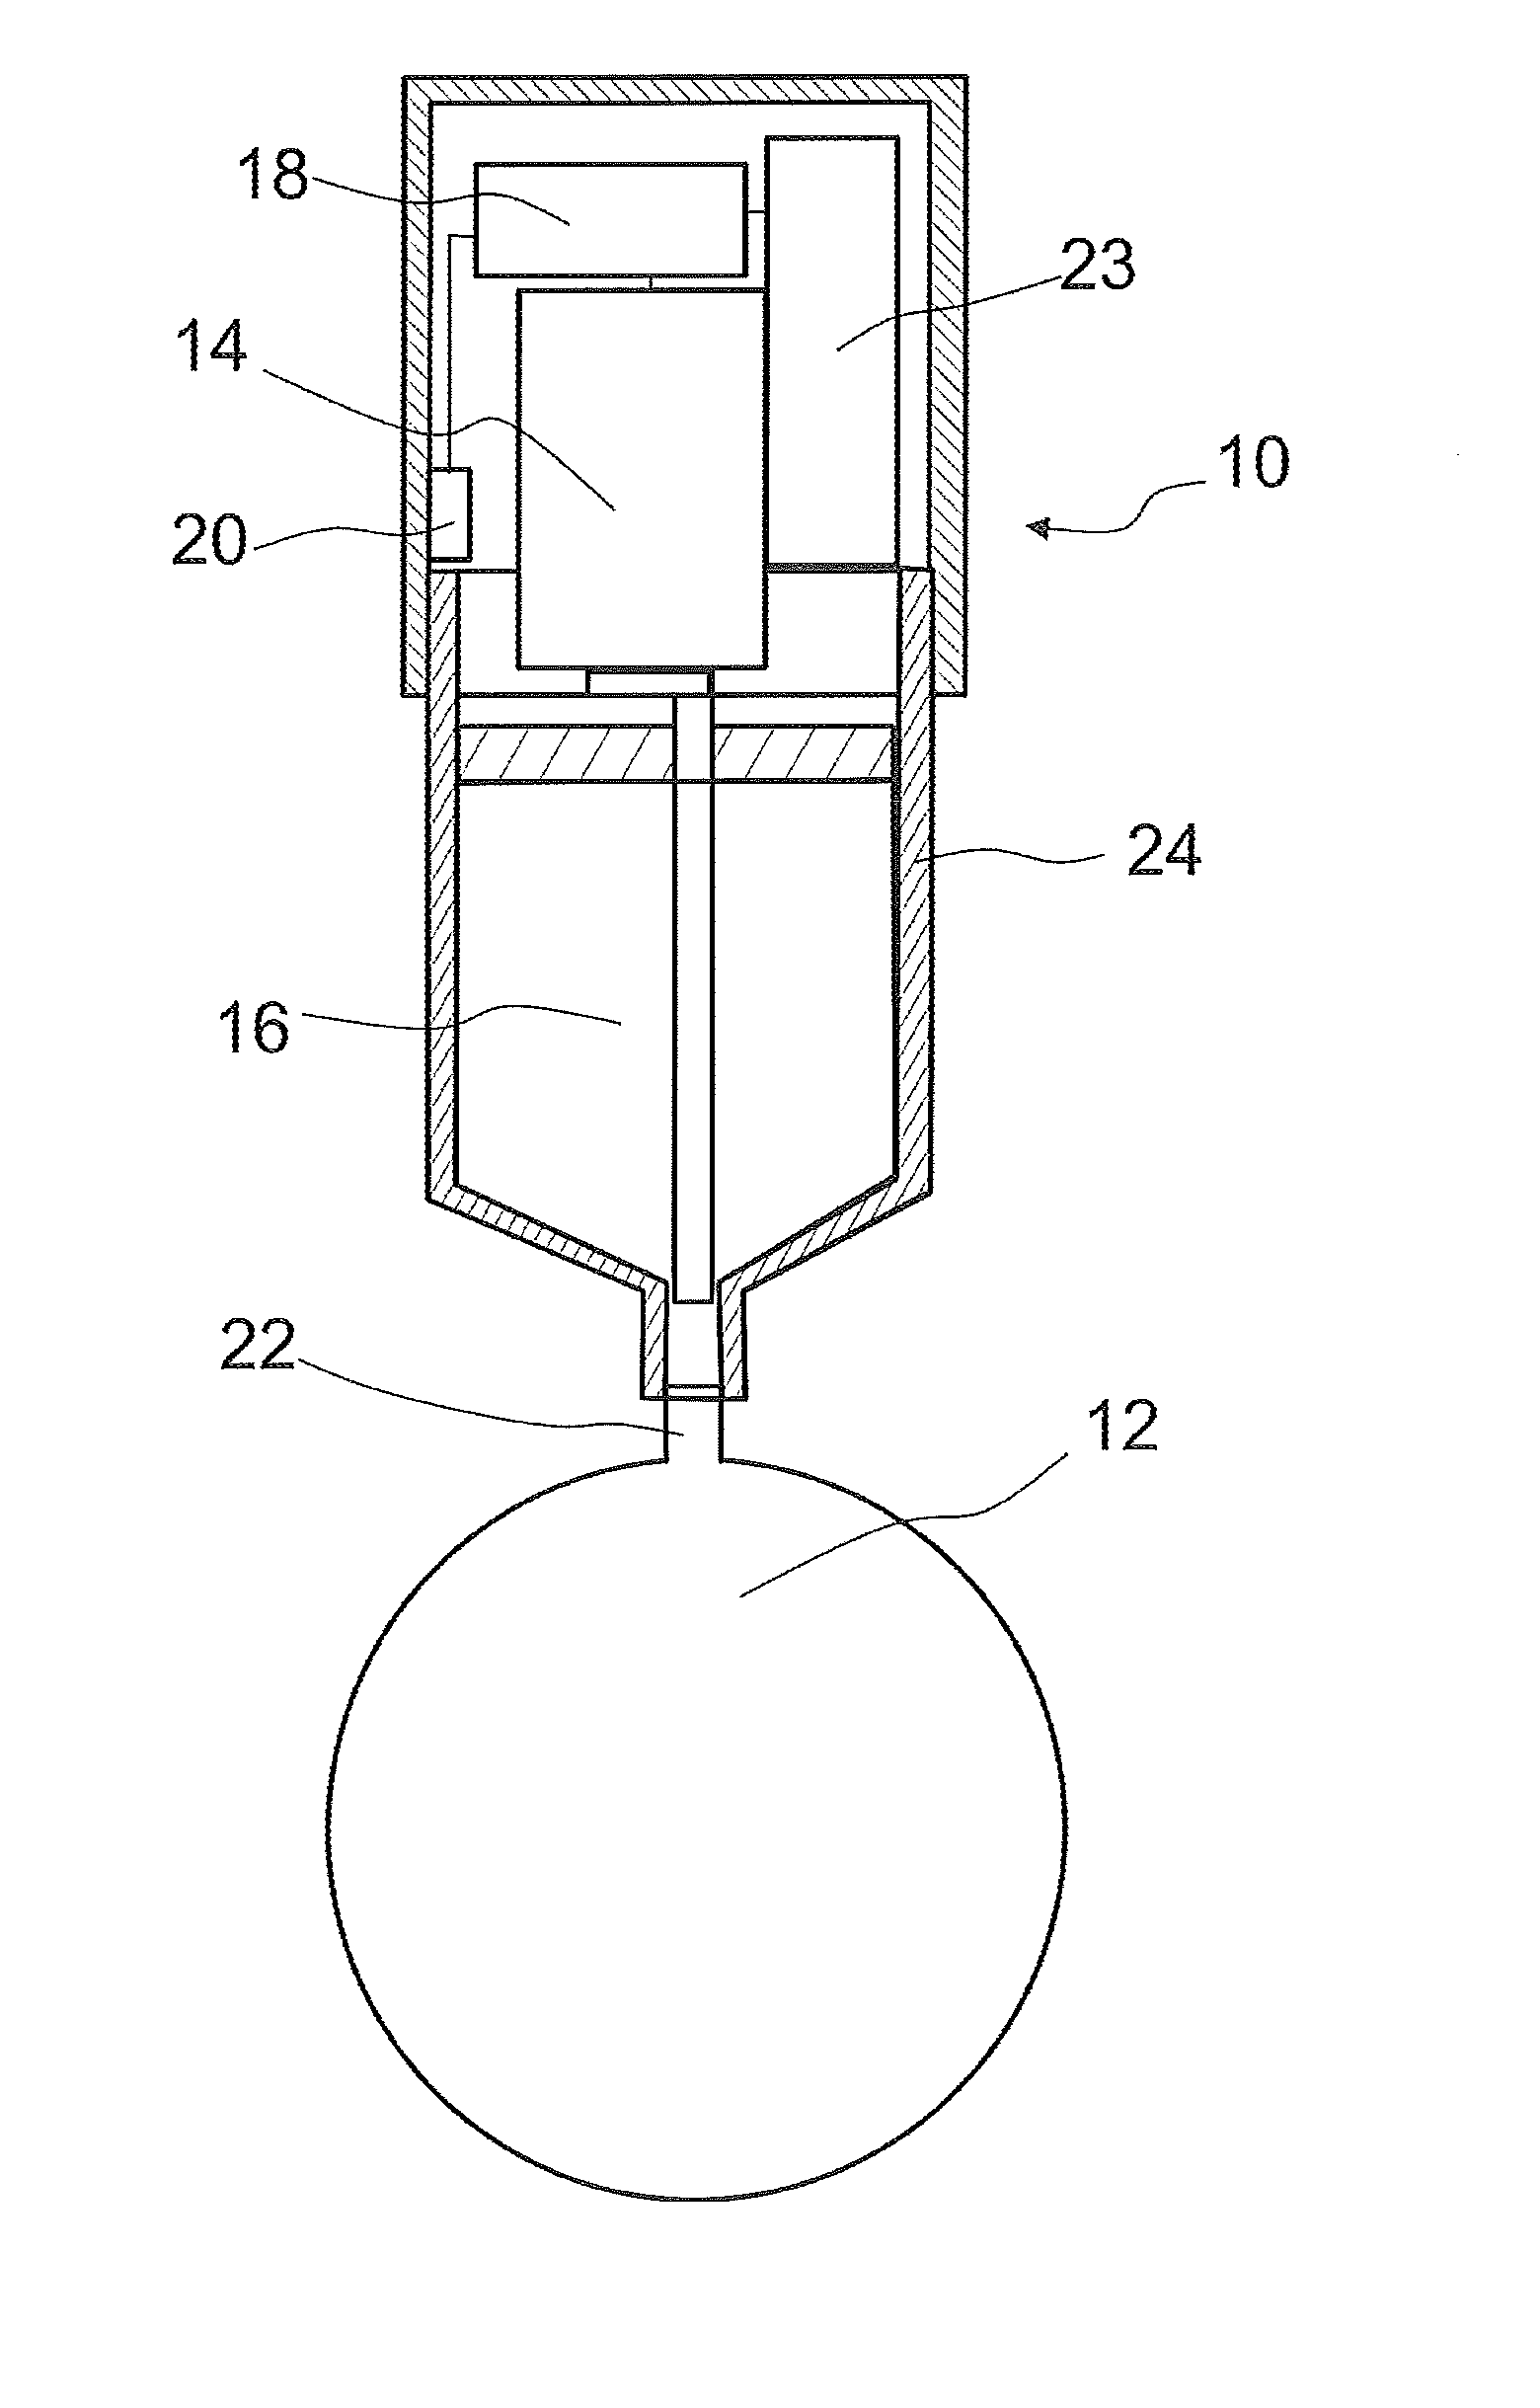 Lubricating device with a control unit for operating the lubricating pump